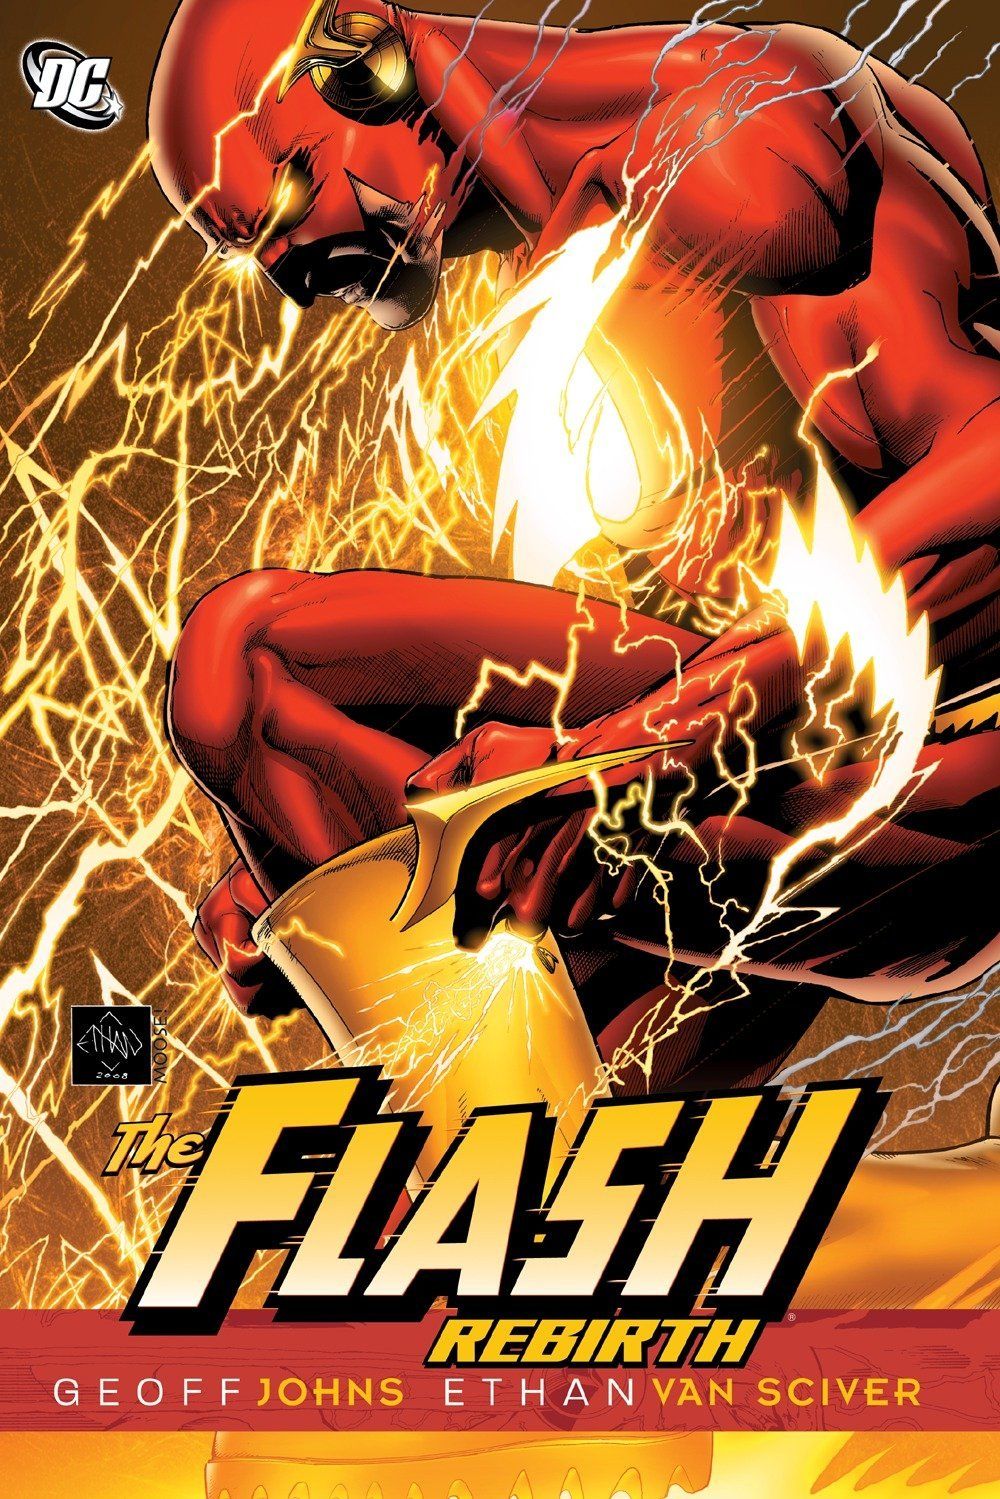 <p><strong>$14.48</strong></p><p>While Marv Wolfman always assumed Barry Allen would come back immediately, Wally West became so popular that the powers that be decided to let the old speedster rest. That is until the high-concept crossover <em>Final Crisis</em>, in which Flashes Wally and Jay Garrick encounter Barry living in the Speed Force, the magical energy that gives all speedsters their powers. After that brief cameo, writer Geoff Johns and artist Ethan Van Sciver fleshed out Barry Allen’s proper return to the DC Universe. </p><p>Most of <em>Flash: Rebirth</em> explains how Barry survived his apparent sacrifice in <em>Crisis on Infinite Earths</em> and his relationship with the Speed Force. However, the most enduring aspect of the story is the way it rewrites Barry’s history. Throughout the Silver Age, Barry didn’t have much of a backstory, as writers simply assumed that people didn’t need a tragic event to become superheroes. Johns changes that by revealing that Barry was inspired to do good after his father was unjustly prisoned for murdering his mother, a crime actually committed by his arch-nemesis the Reverse Flash. This revision has become the true origin of Barry Allen, repeated not only in the comics that followed but also in the <em>Flash </em>TV show and movie.</p>